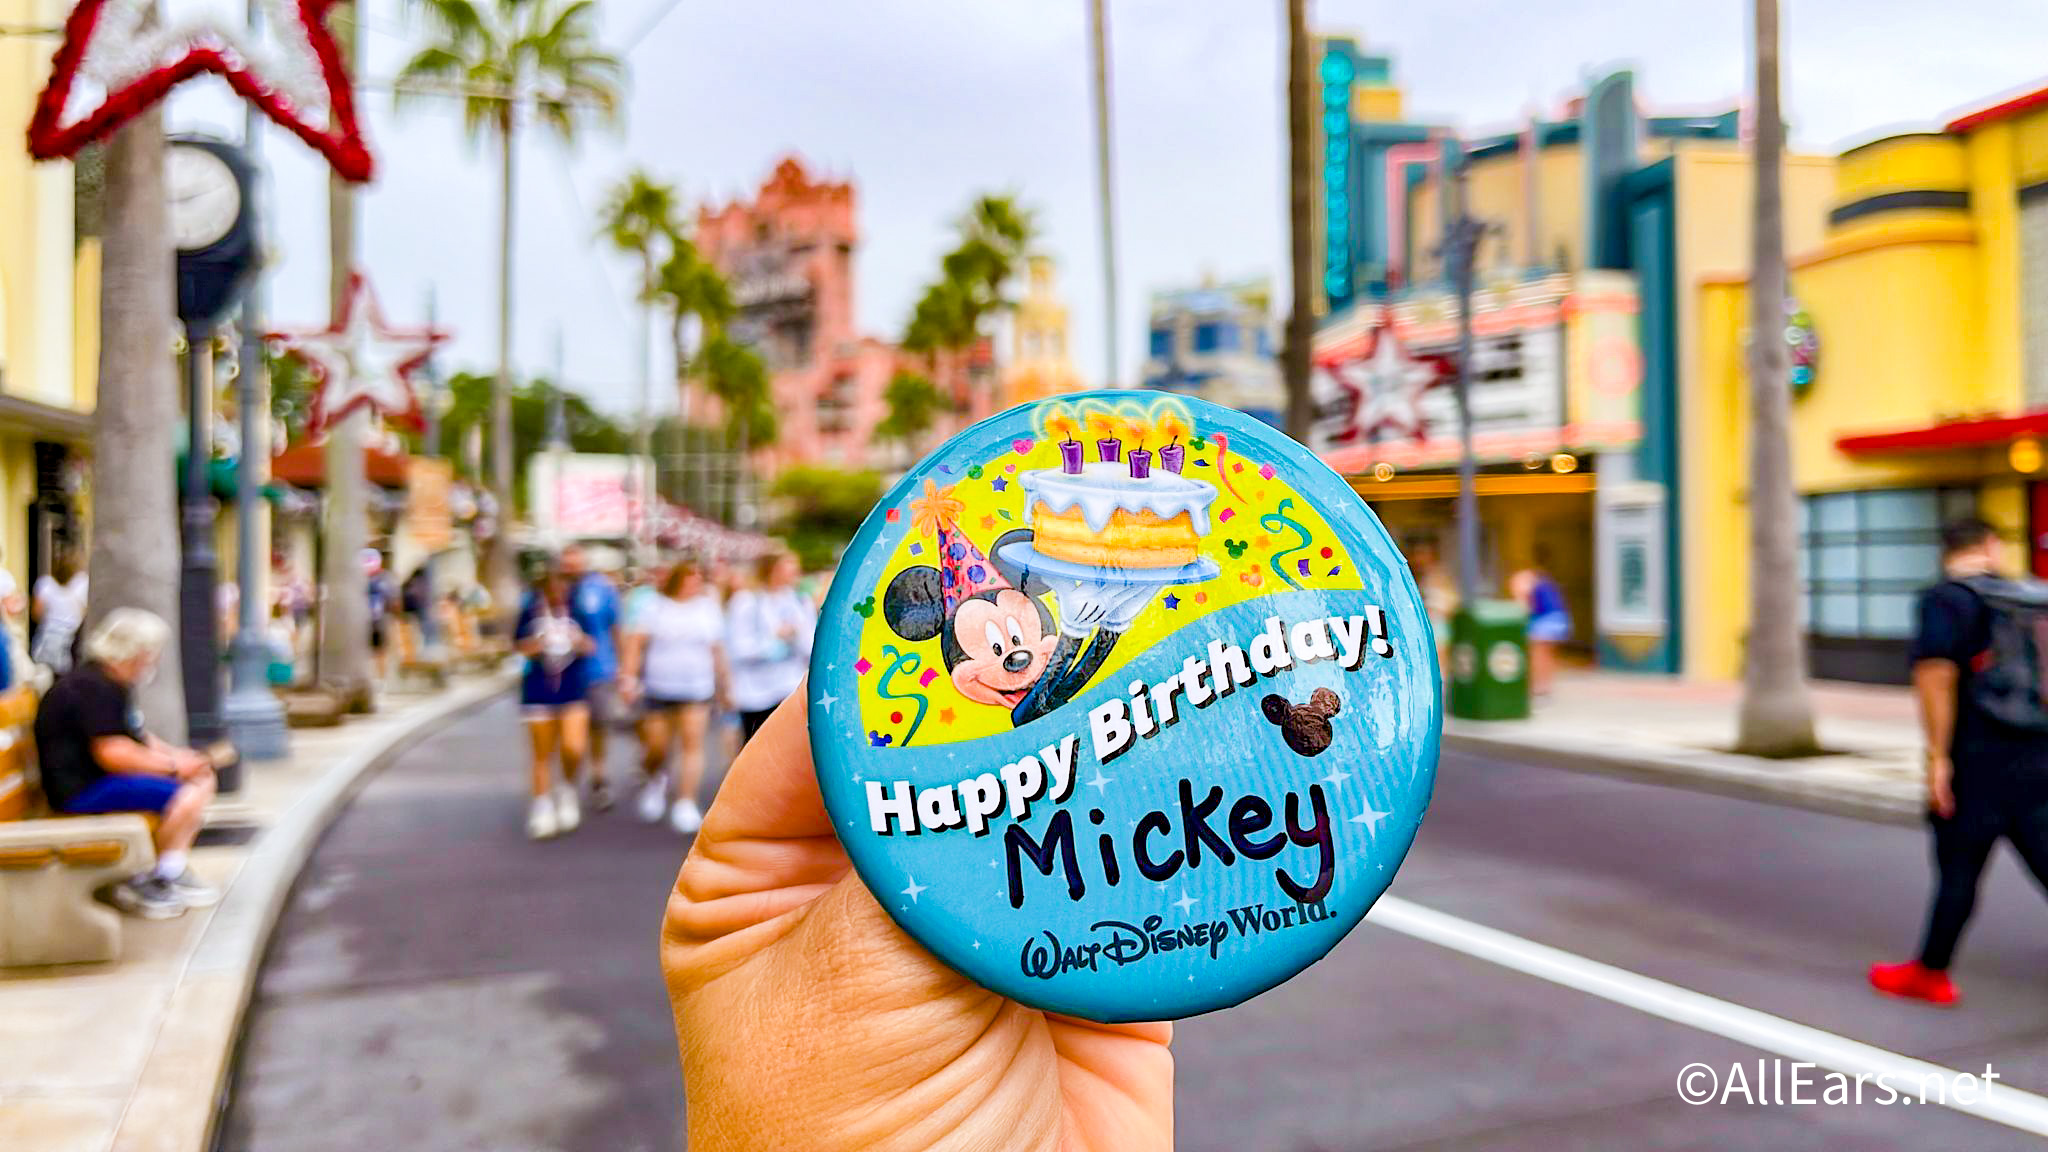 PHOTOS: Happy Birthday Mickey and Minnie 2023 Button Available at